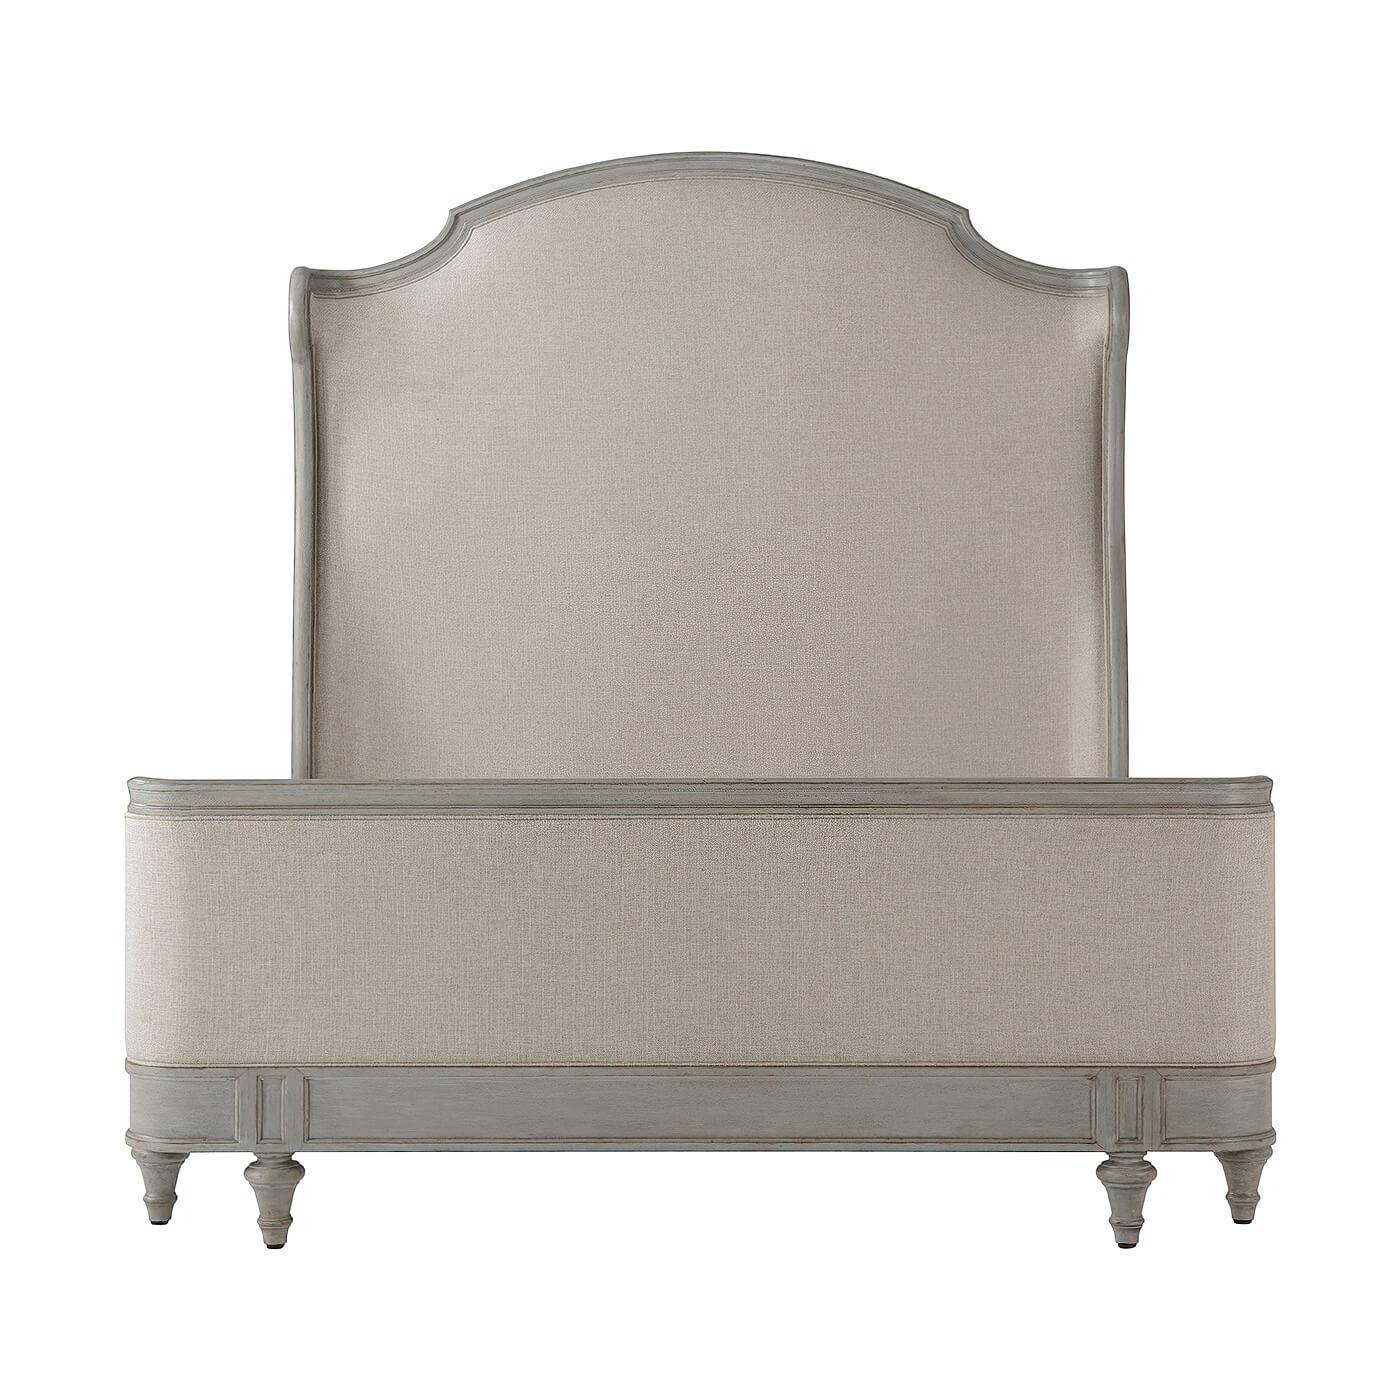 A French Provincial carved and painted Queen Size bed with an arched and molded upholstered headboard with scroll wings, an upholstered and hand-carved framed low footboard and paneled rails on turned and tapered taupee feet. 
Dimensions: 66